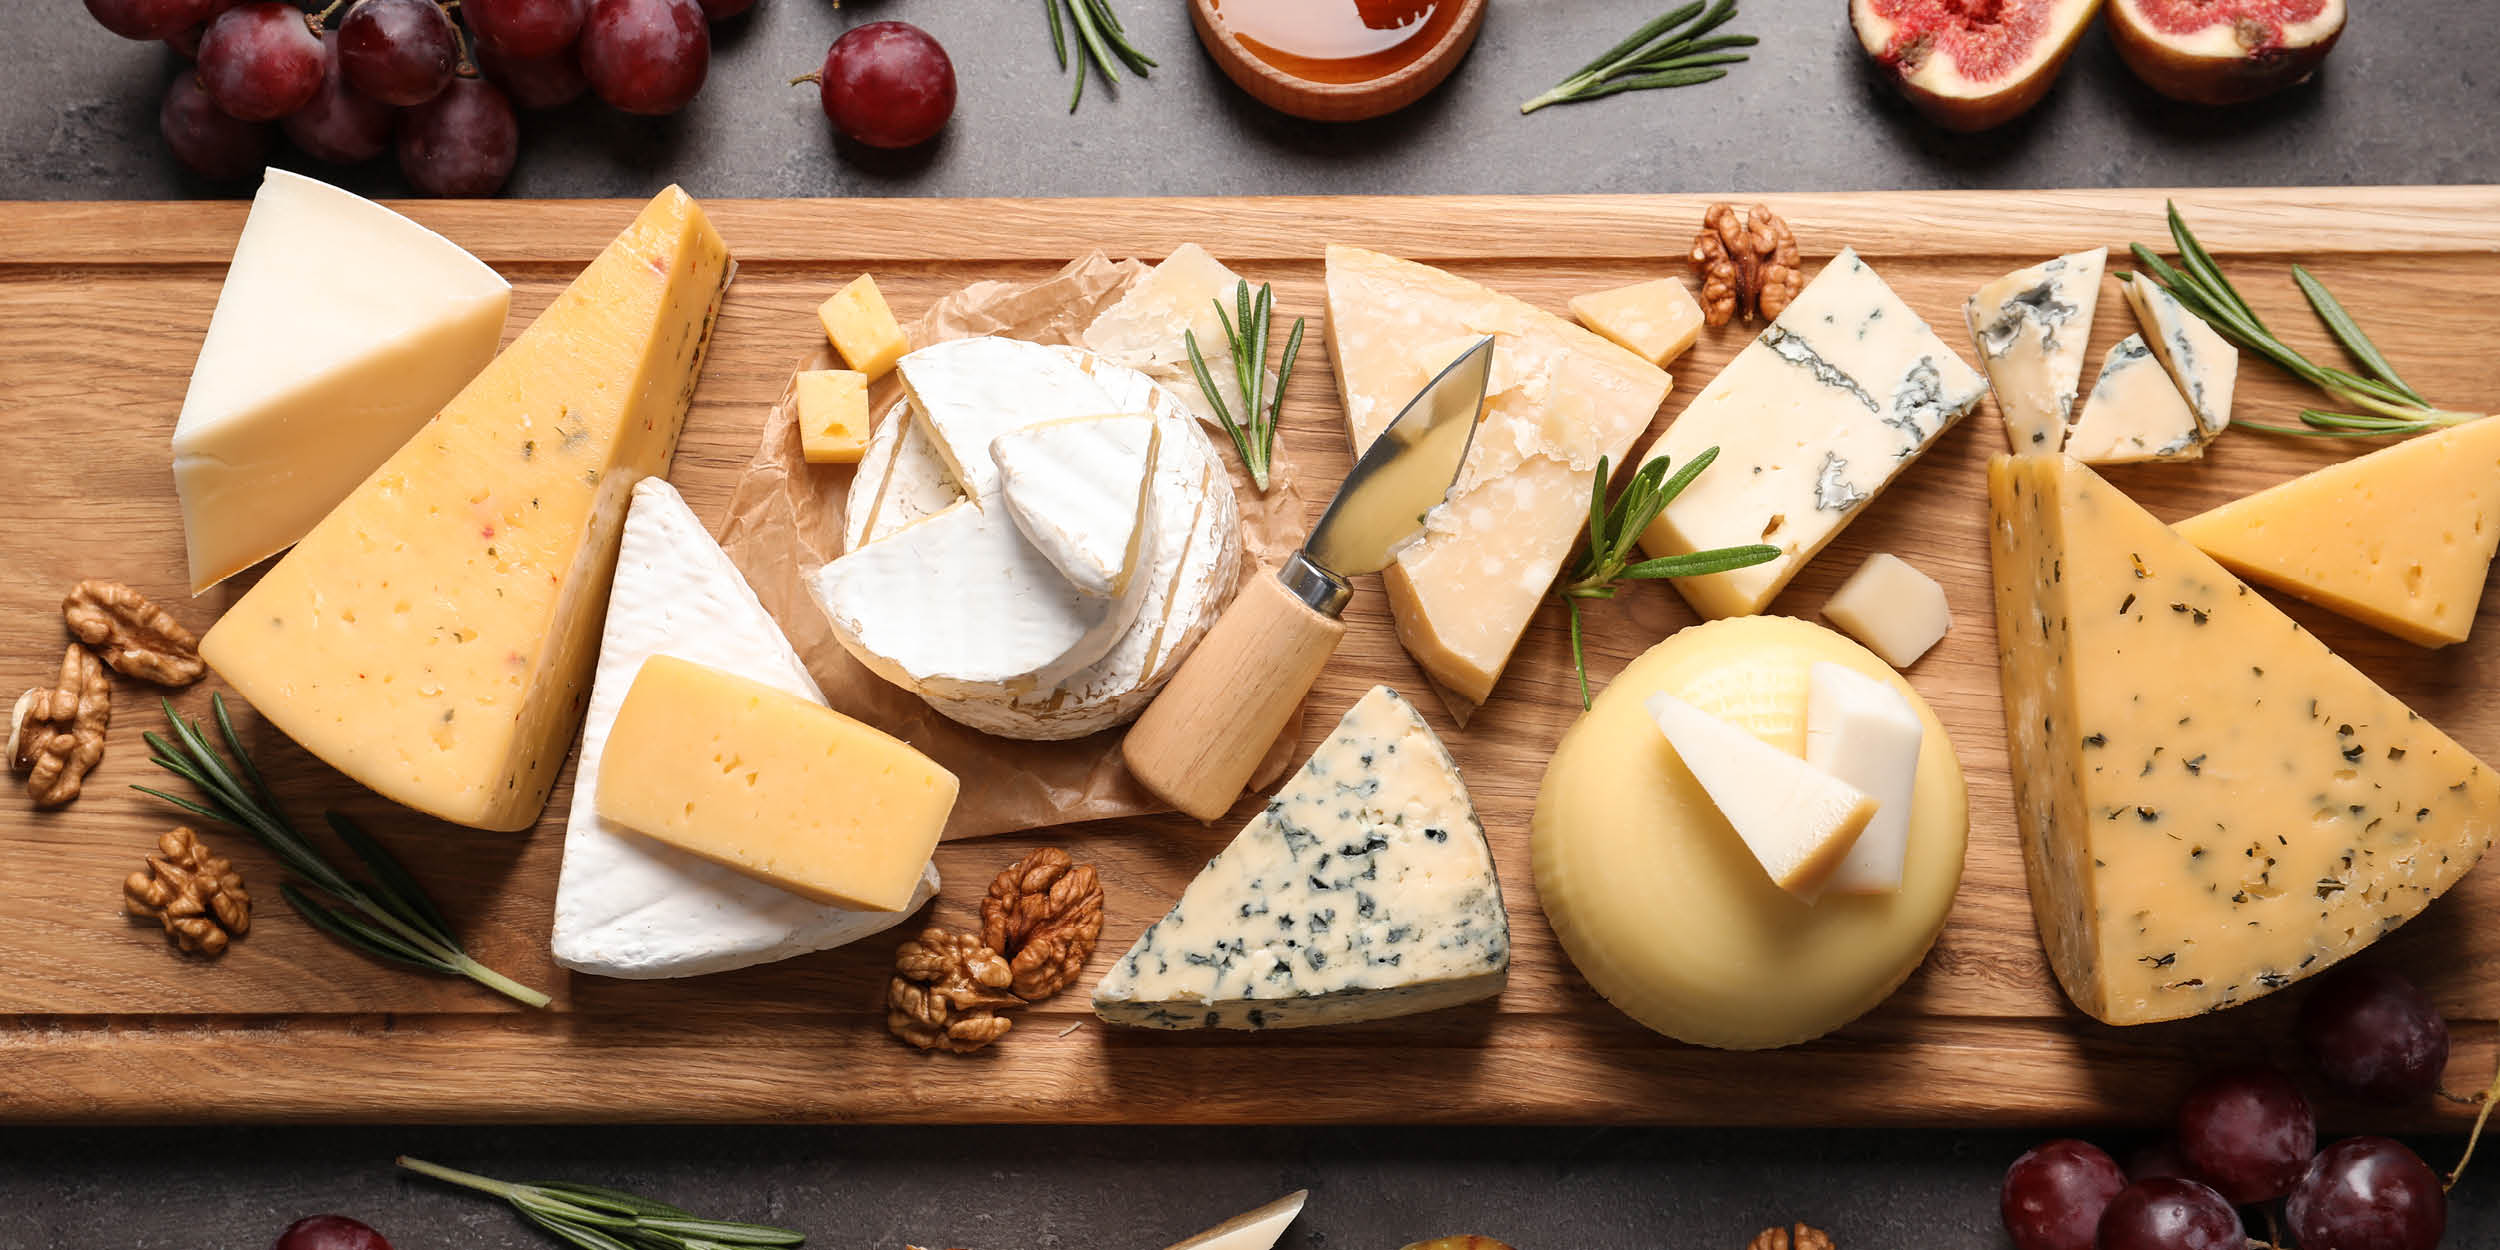 Chefs plan cheese and wine event for residents